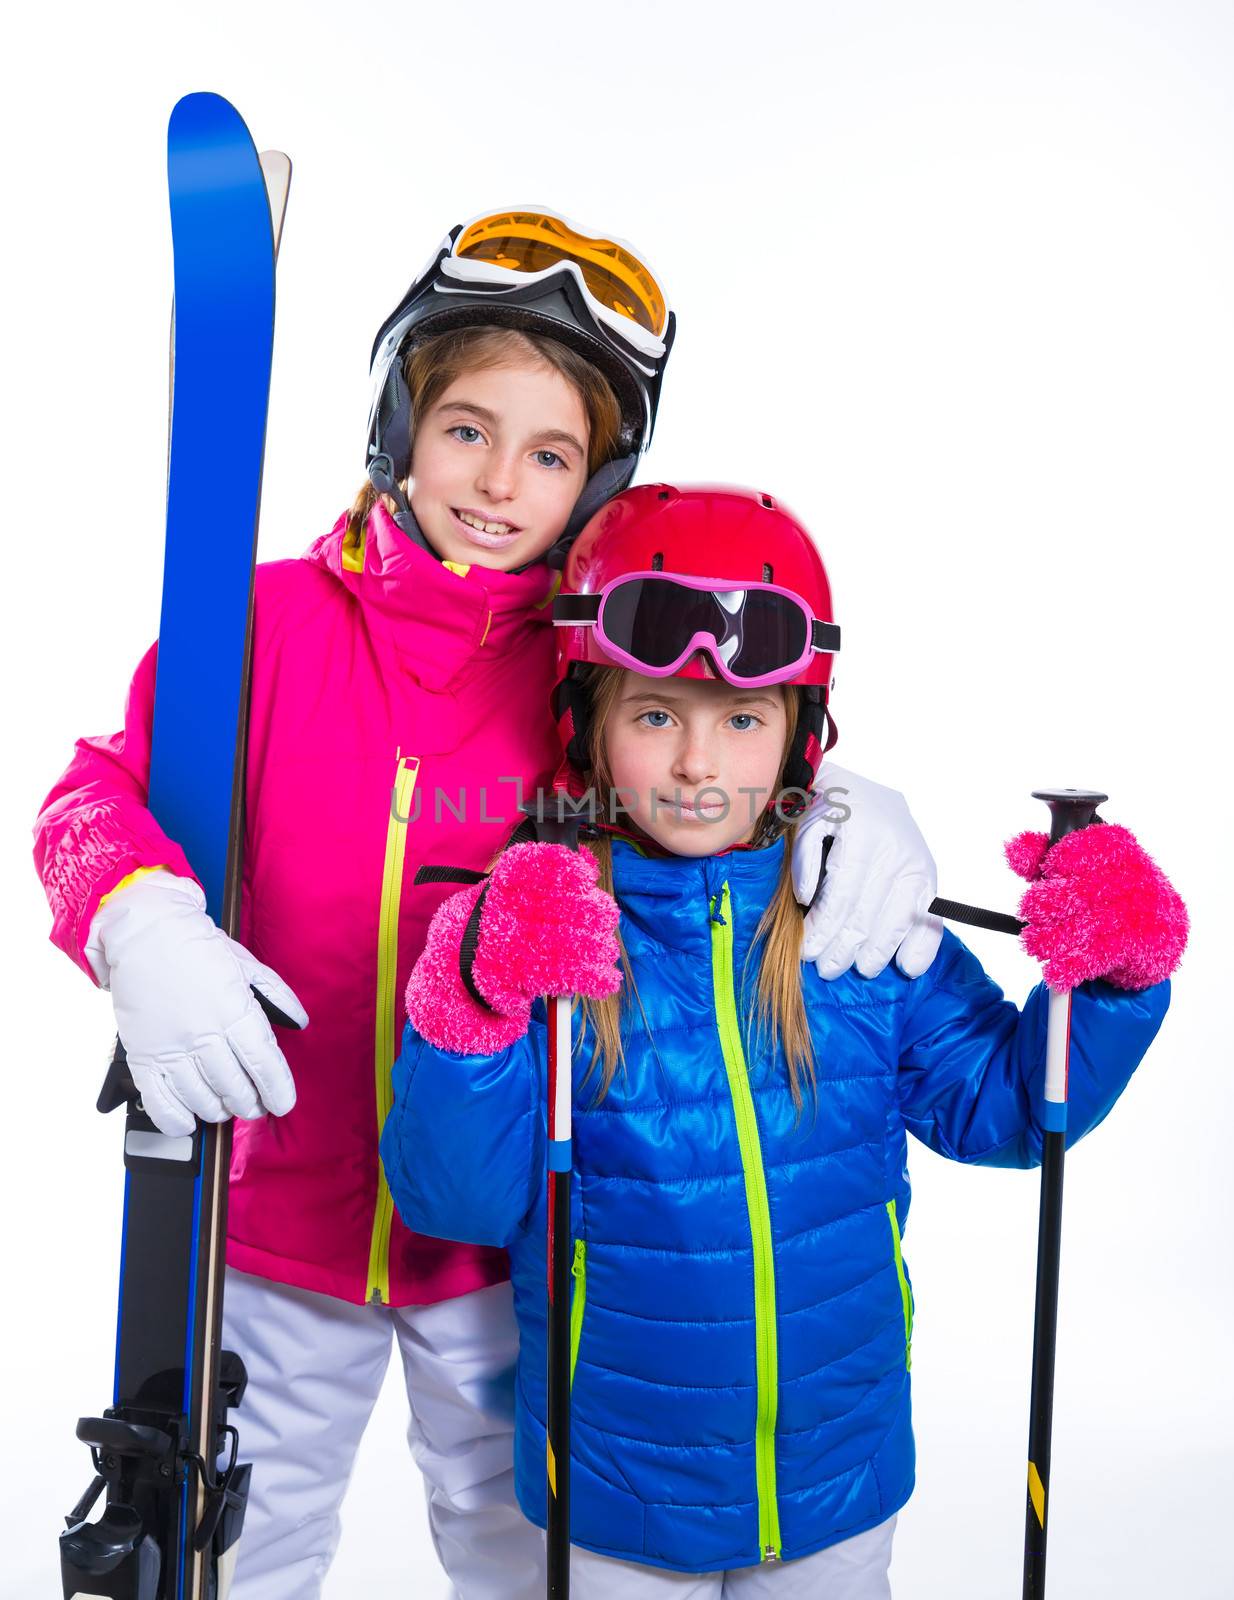 siters kid girls with ski poles helmet and goggles going to winter snow